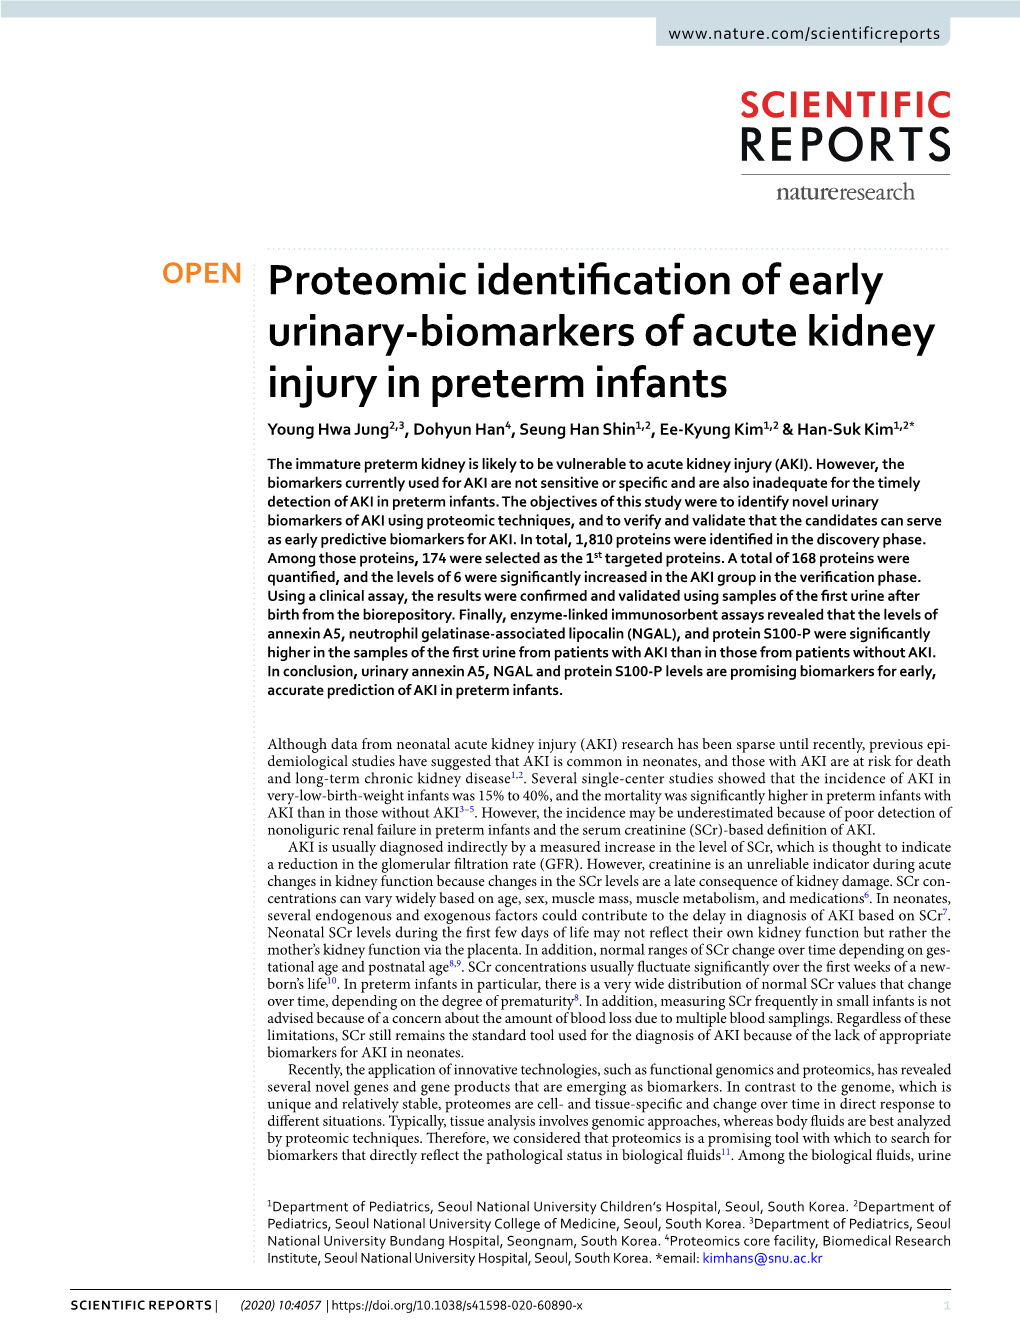 Proteomic Identification of Early Urinary-Biomarkers of Acute Kidney